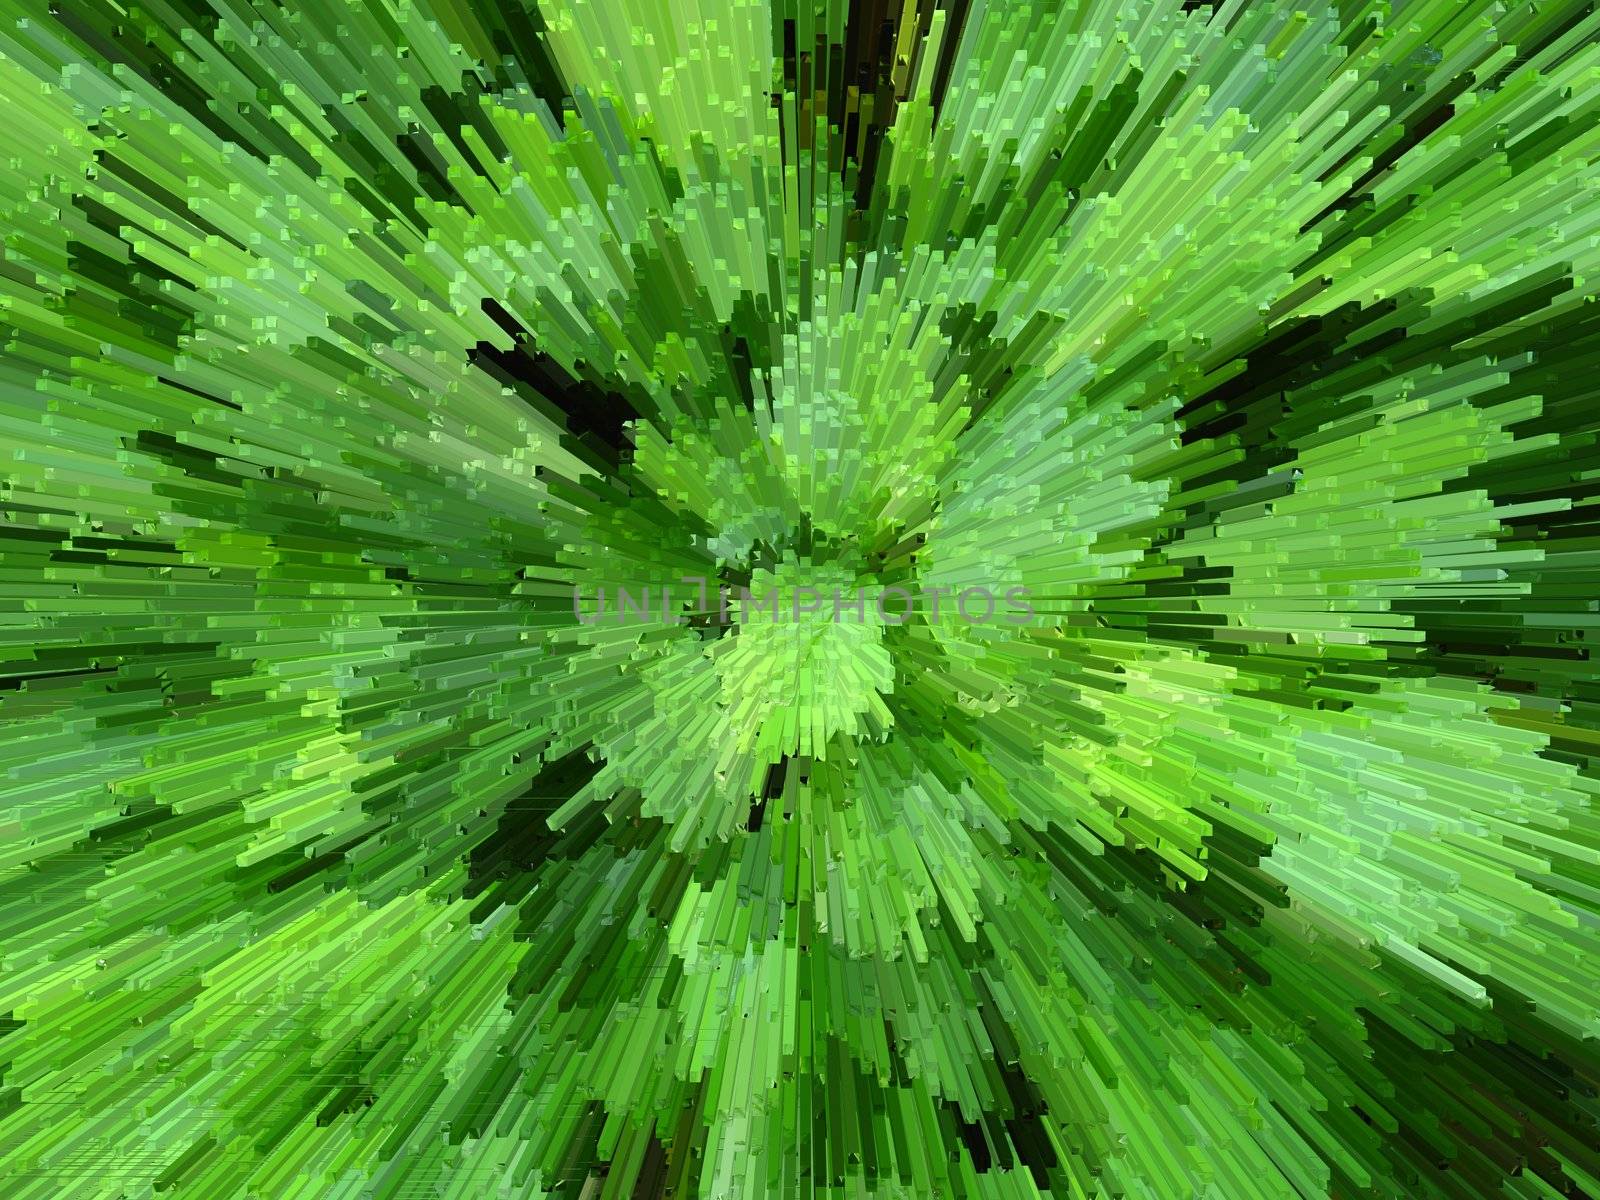 The image of green background from bushes and moss